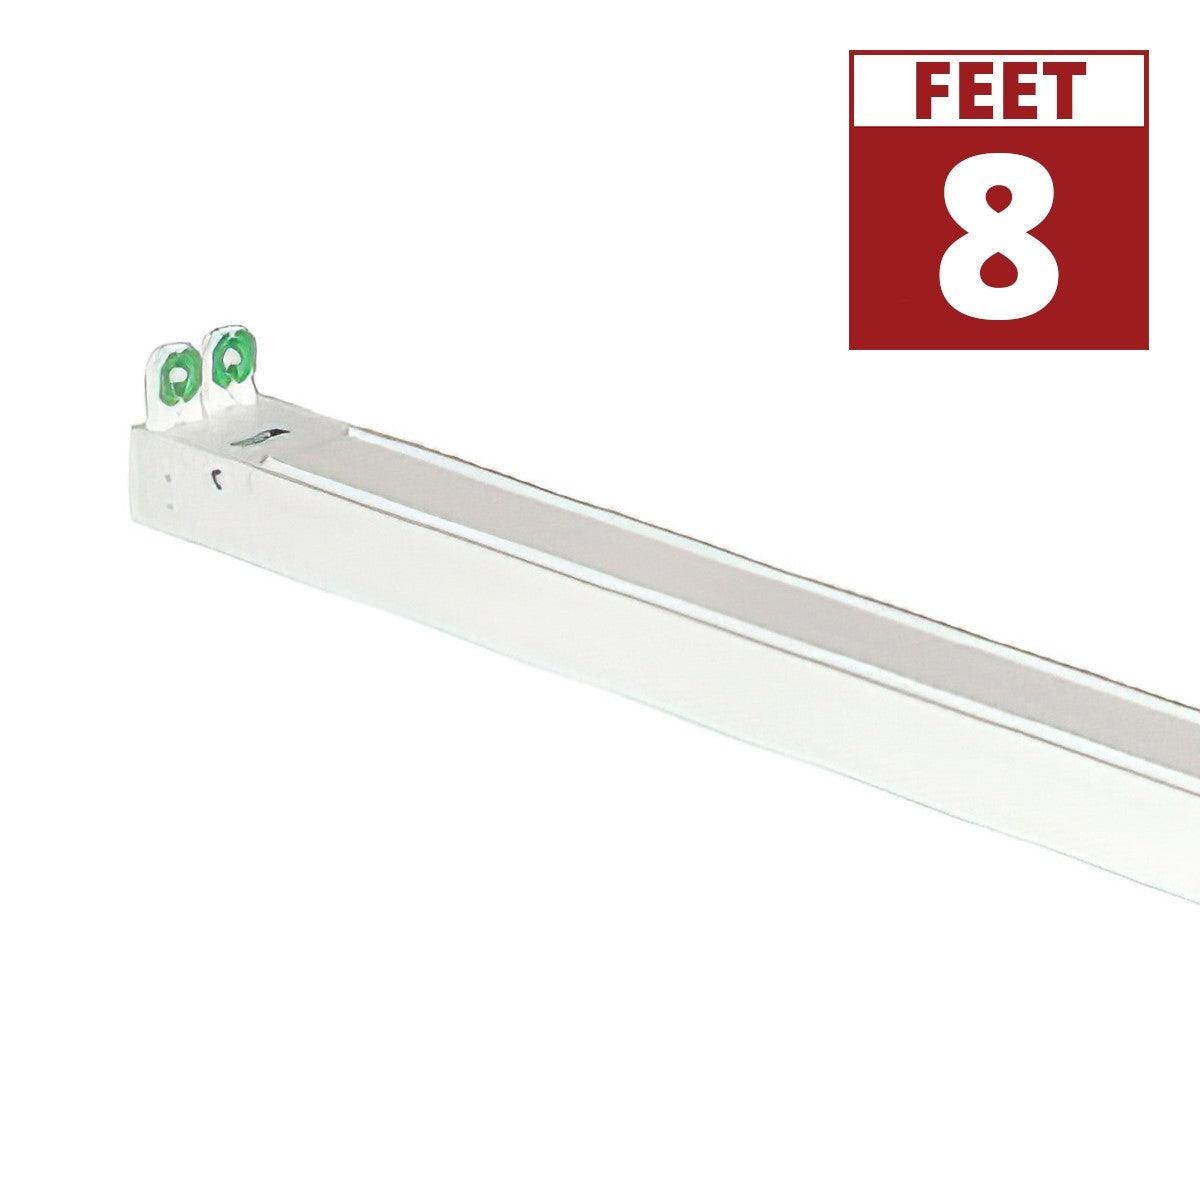 8ft LED Ready Strip Light 4-lamp Double End Wiring LED T8 Bulbs Not Included - Bees Lighting